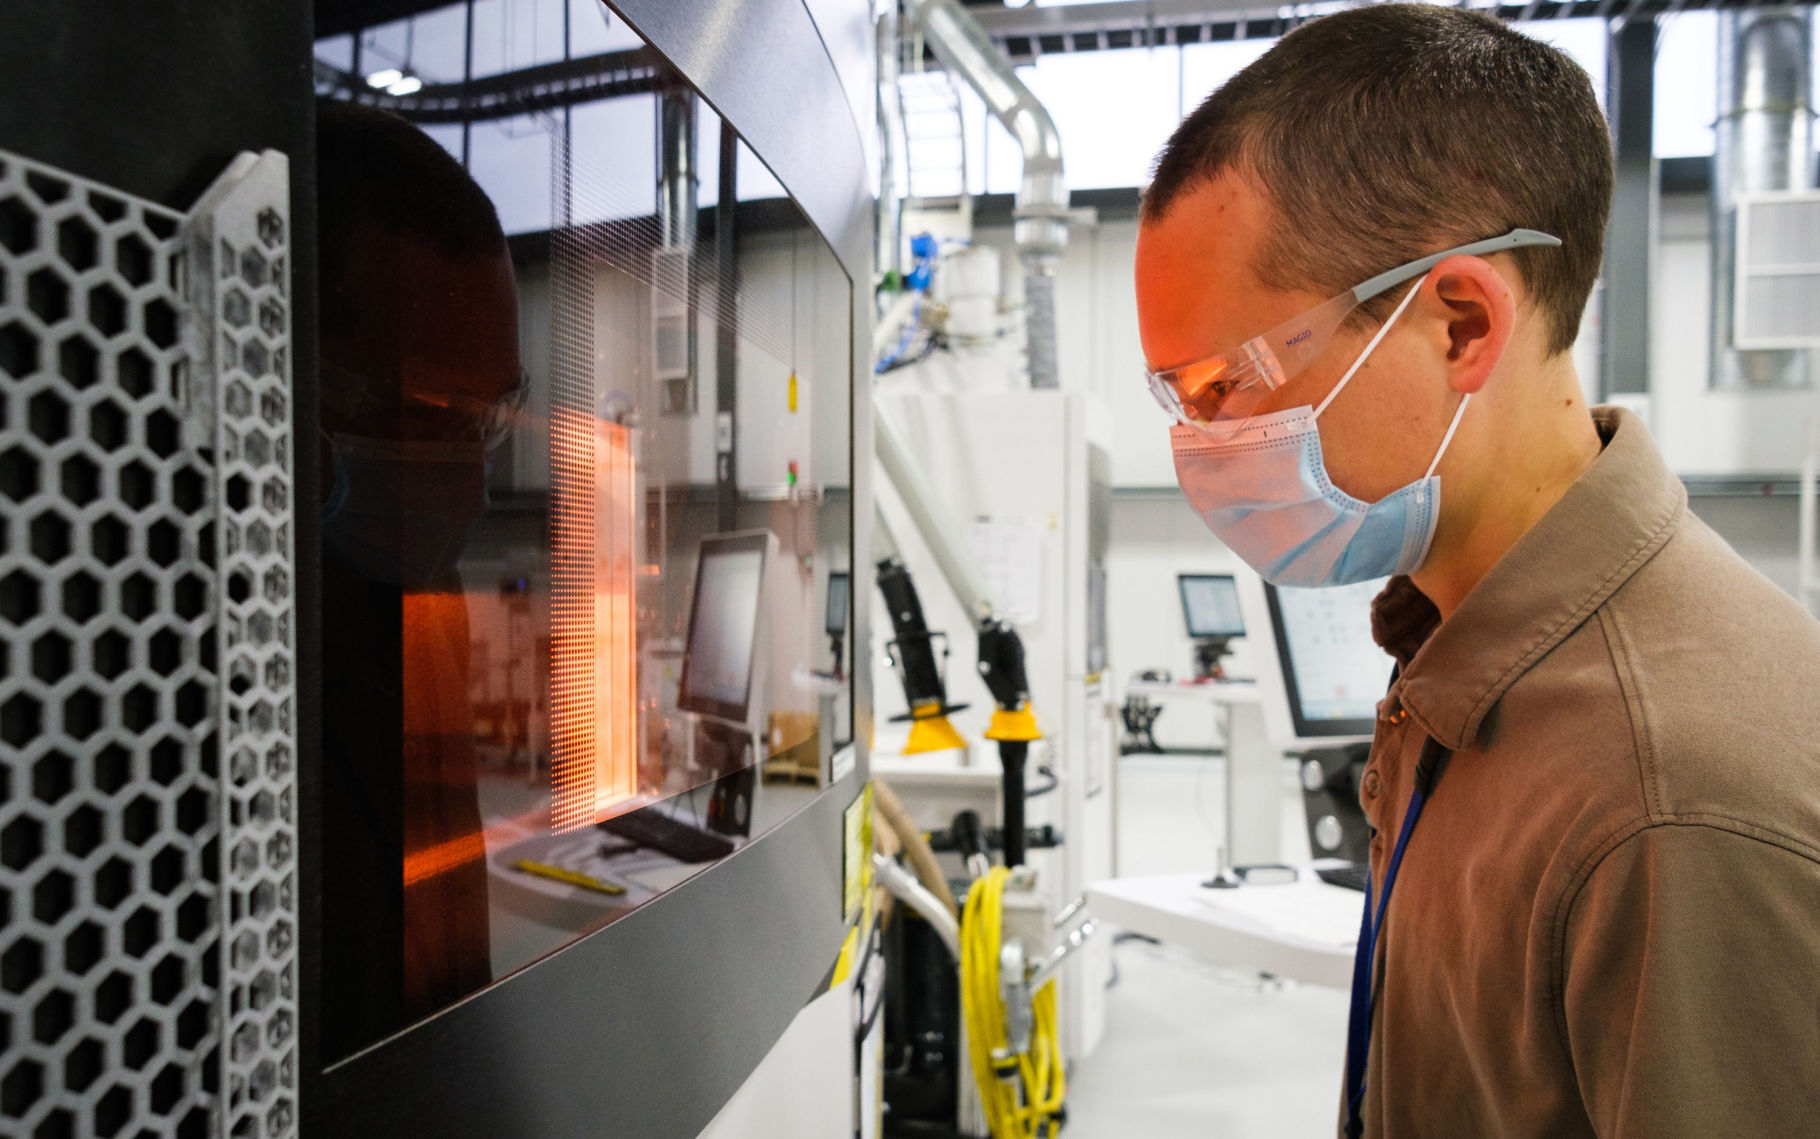 General Motors Manufacturing Engineer Benjamin LeBlanc inspects a 3D printer at the General Motors Additive Industrialization Center at the GM Tech Center in Warren, Mich. PHOTO CREDIT: Tribune News Service